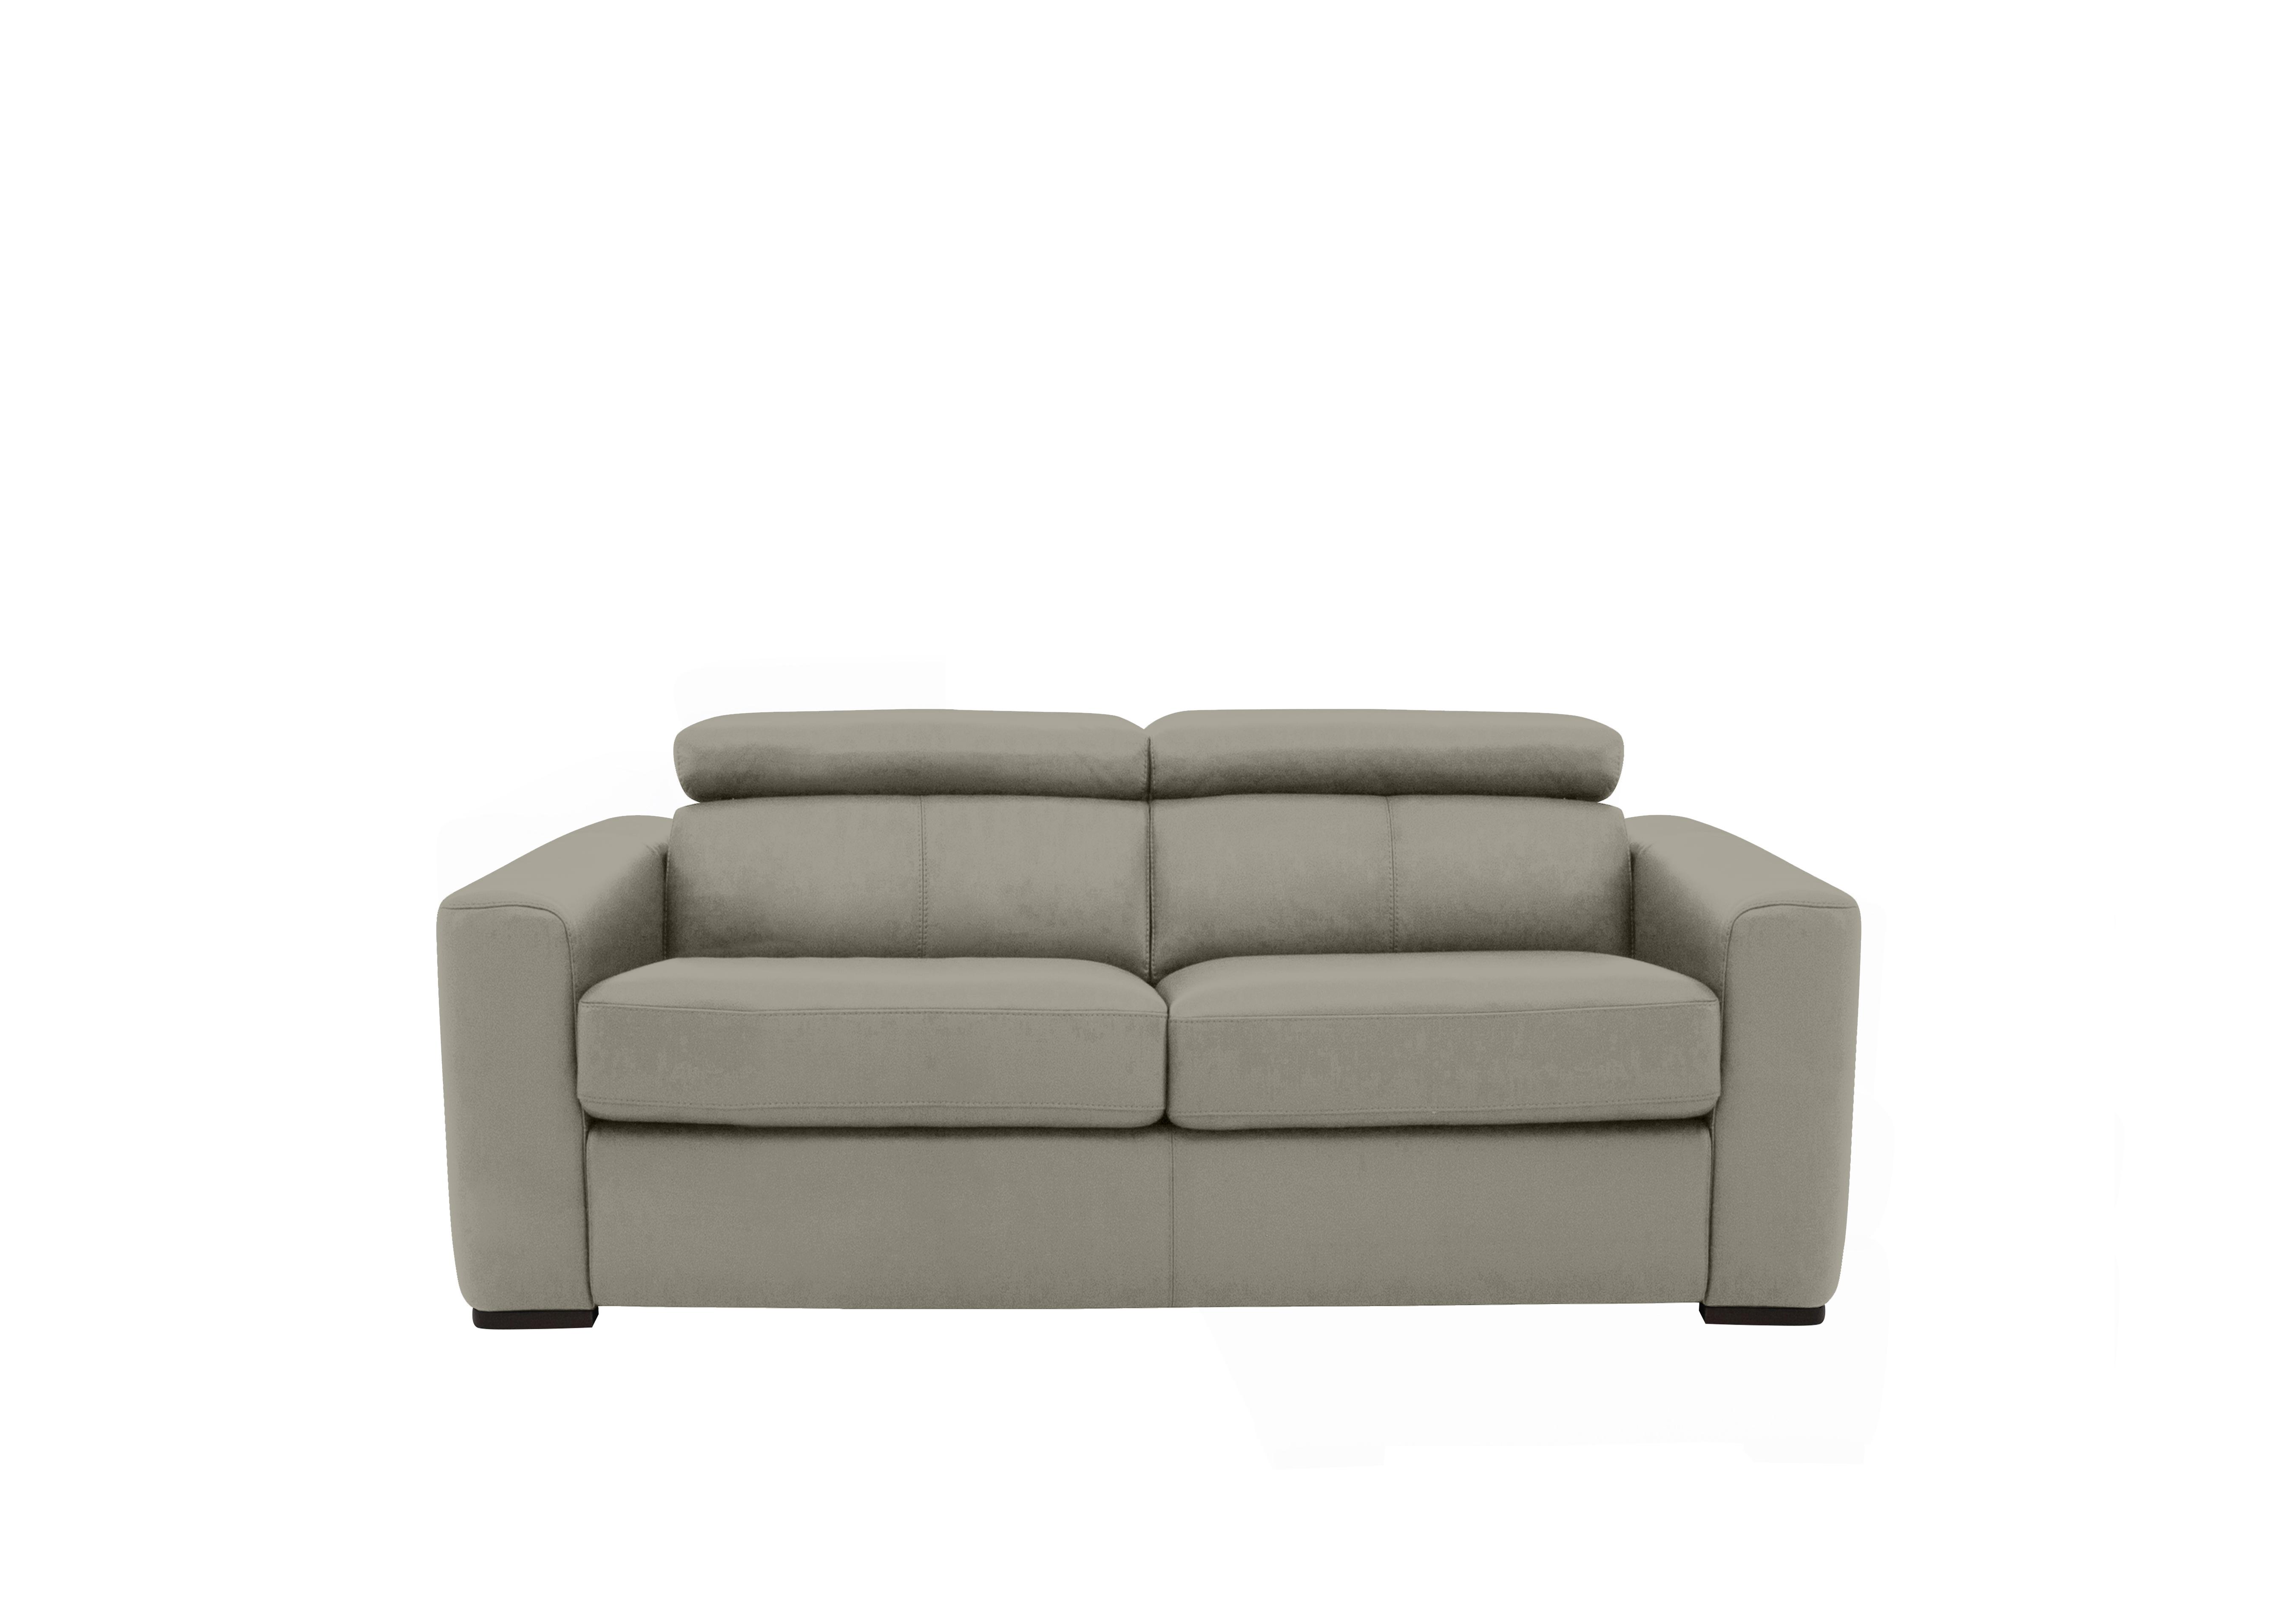 Infinity 2 Seater Leather Sofa in Bv-946b Silver Grey on Furniture Village